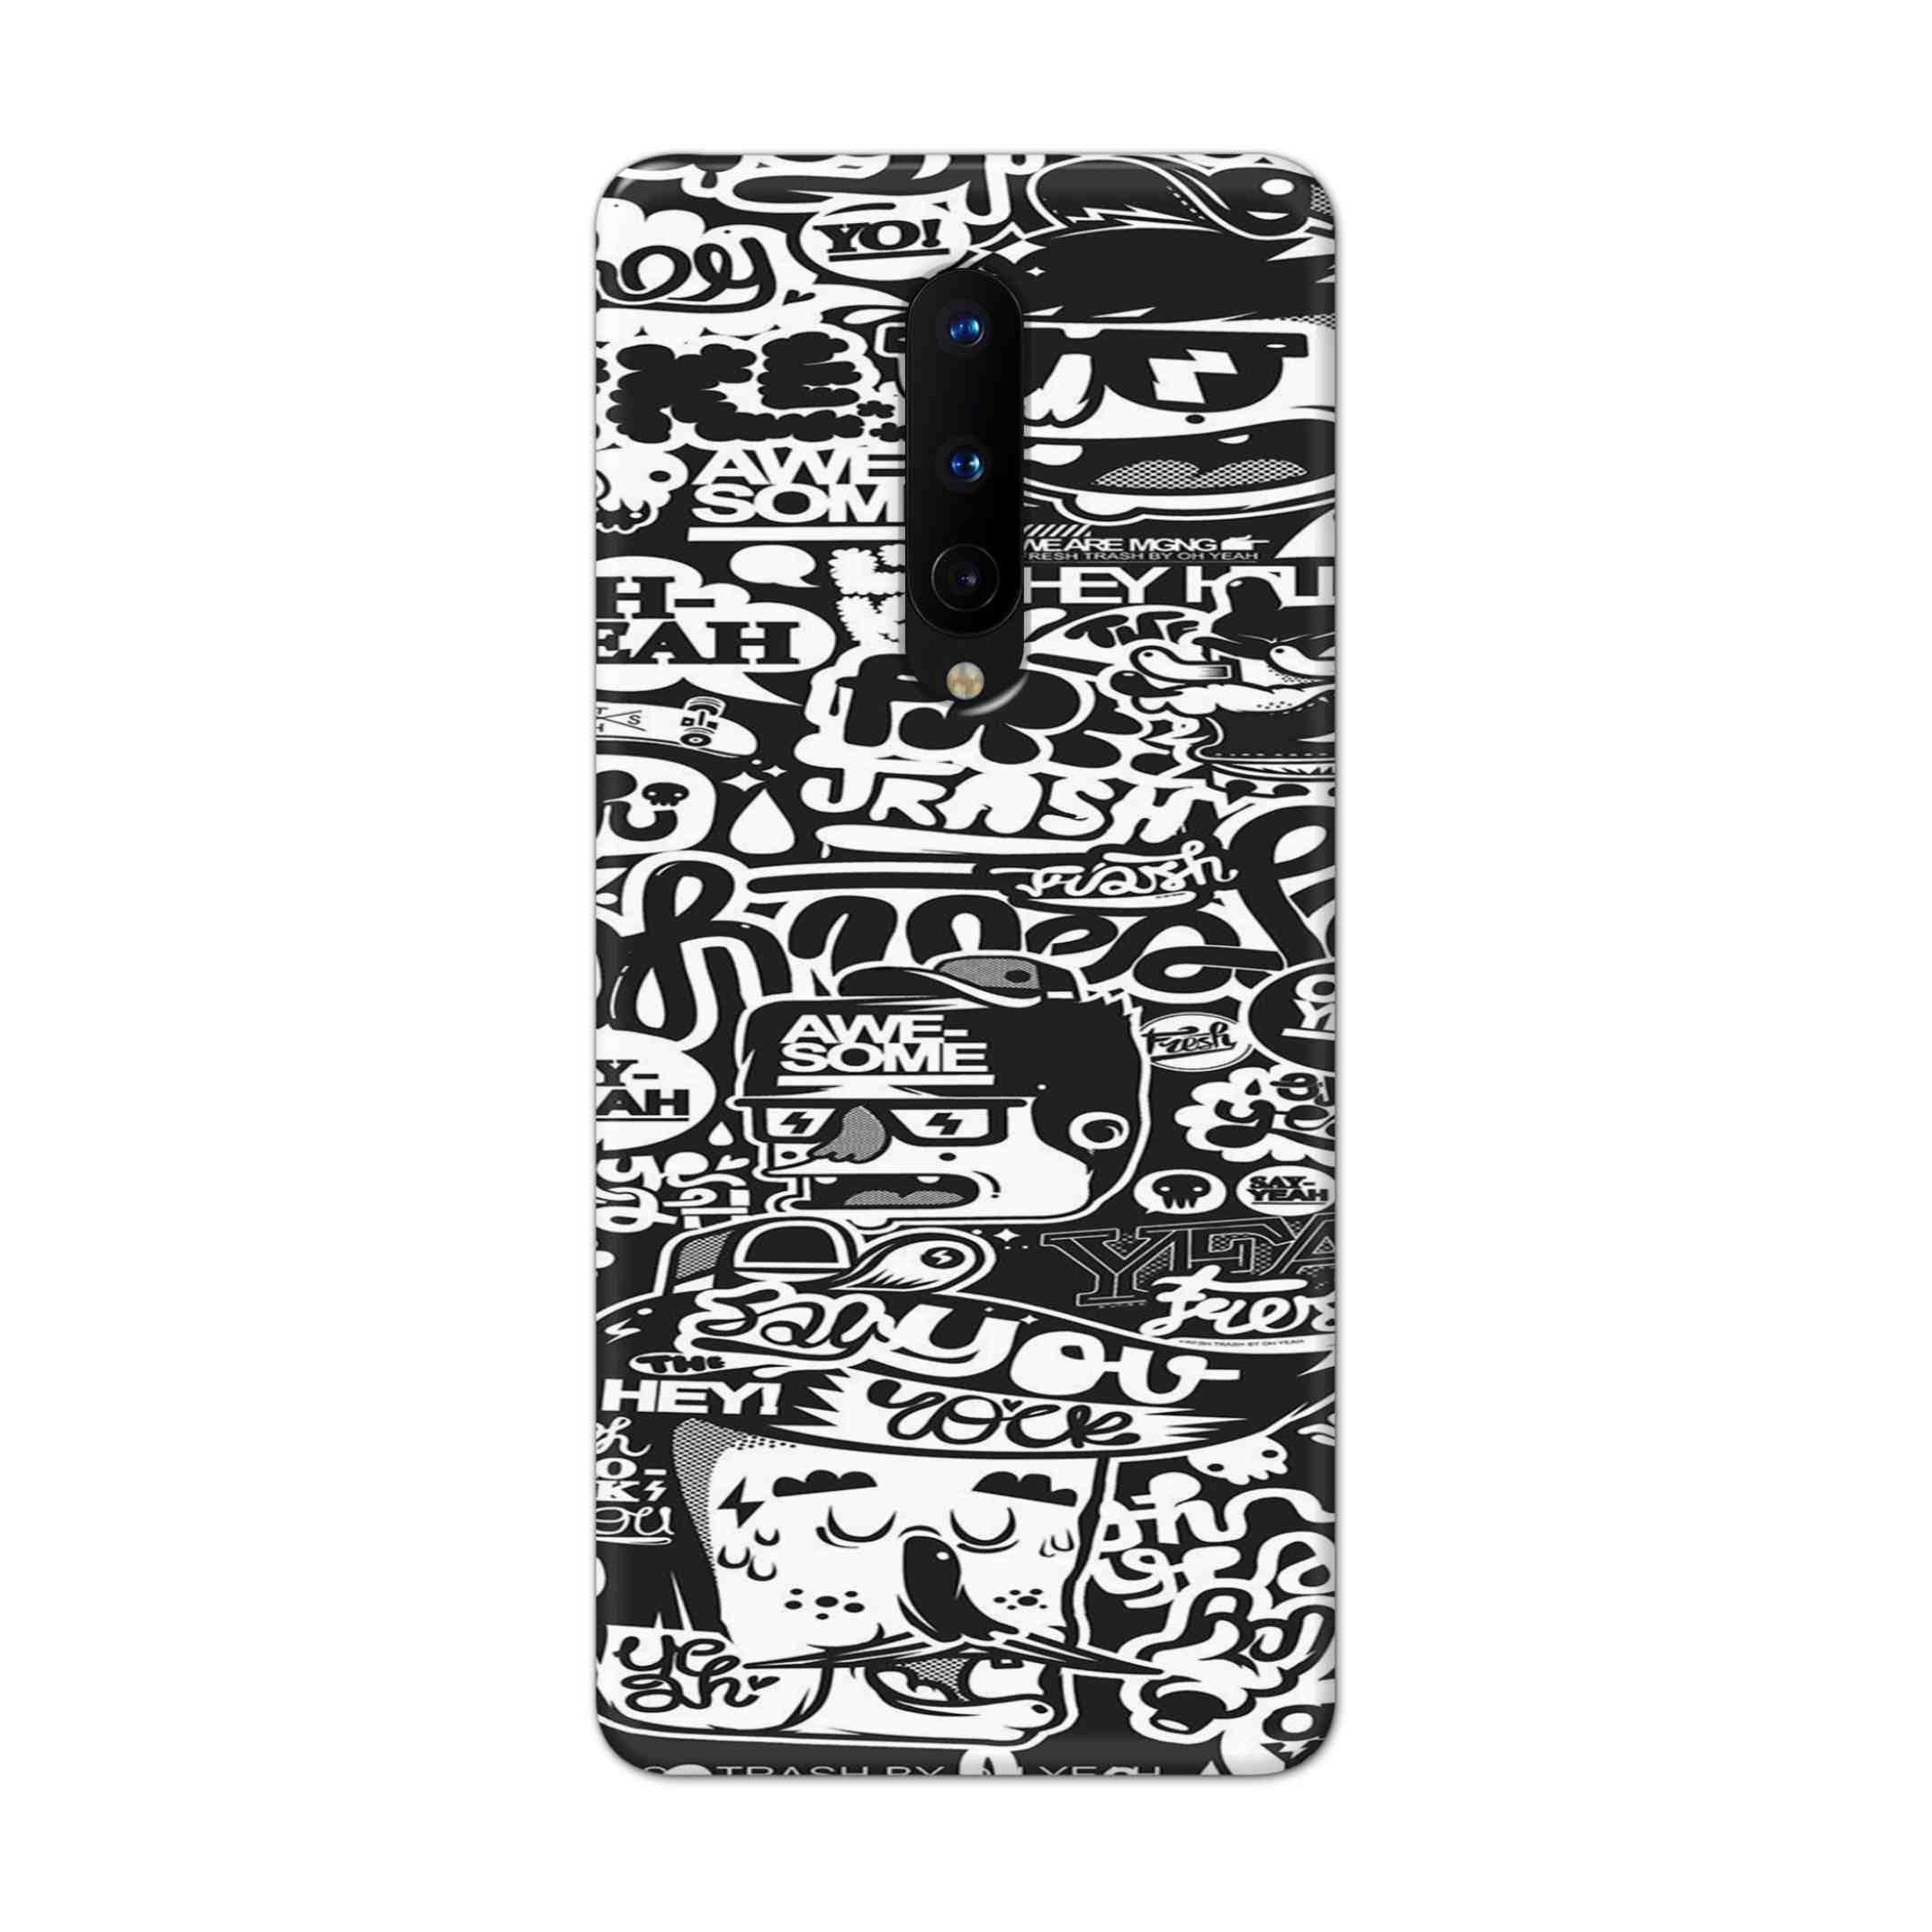 Buy Awesome Hard Back Mobile Phone Case Cover For OnePlus 8 Online